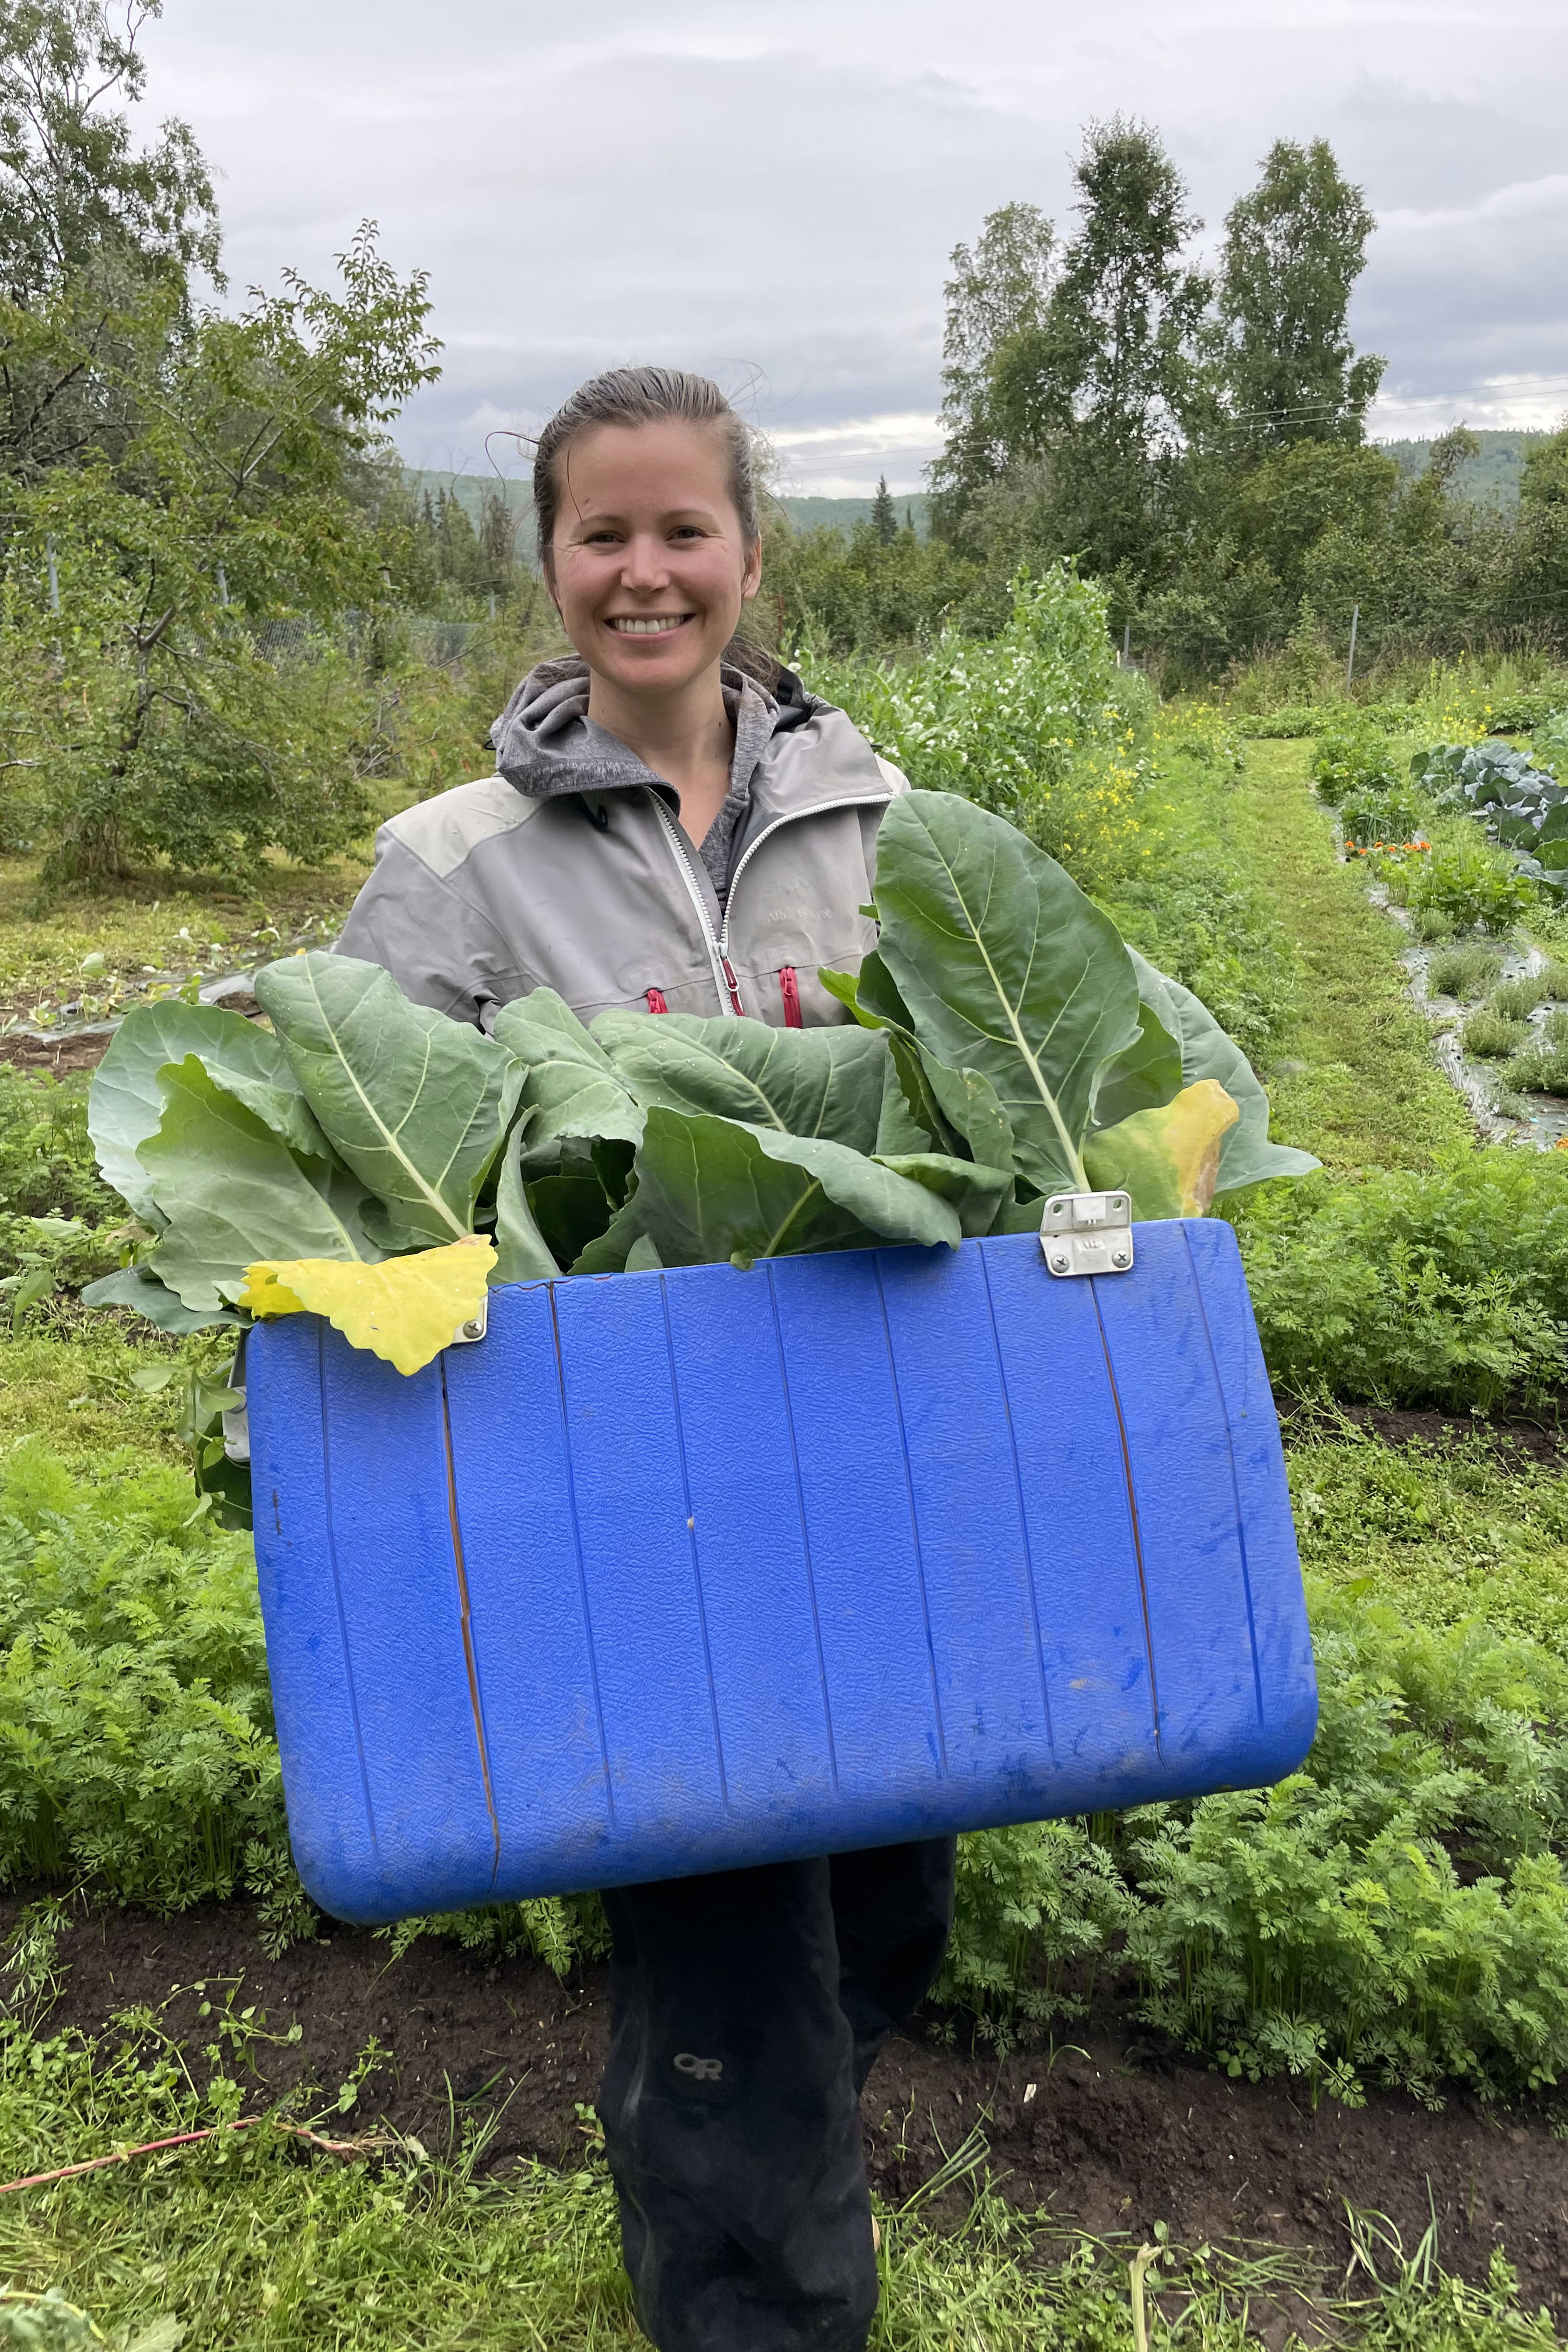 Woman holding a cooler filled with produce.